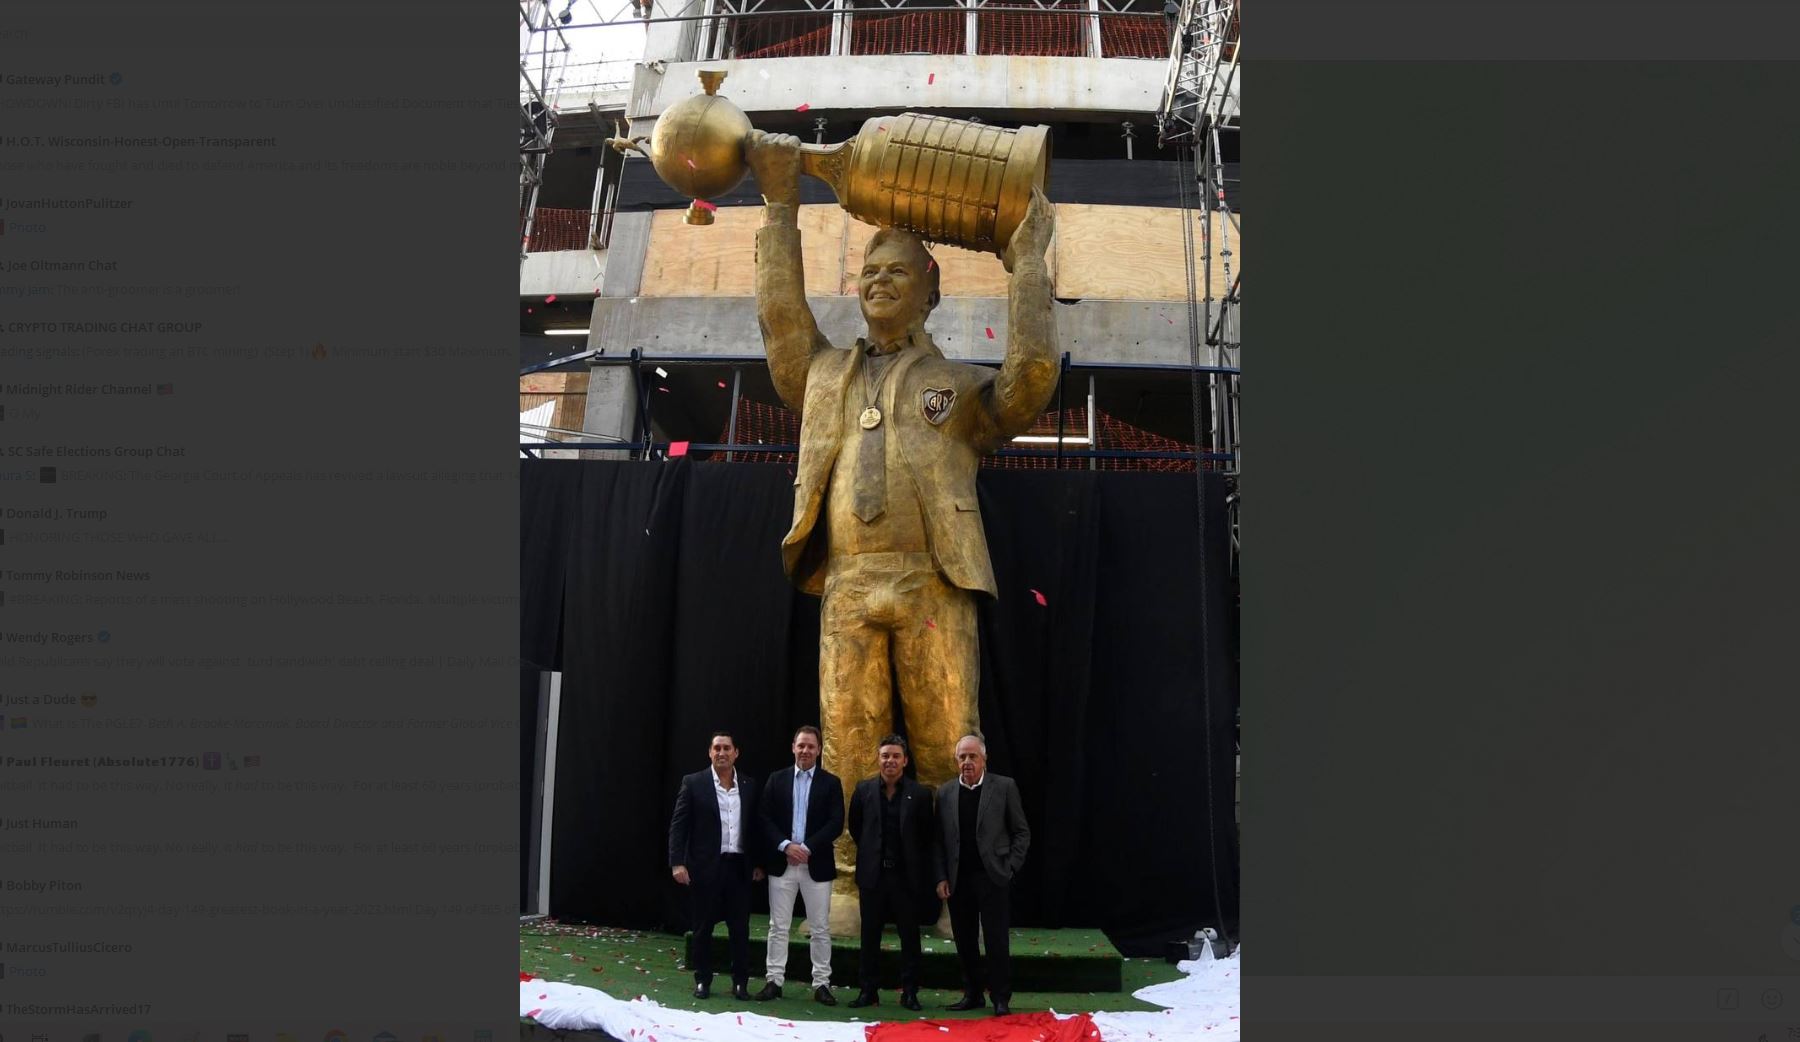 Great Balls of Fire: Uproar After 26-Foot Statue Honoring Soccer Great Has Giant Bulging Balls